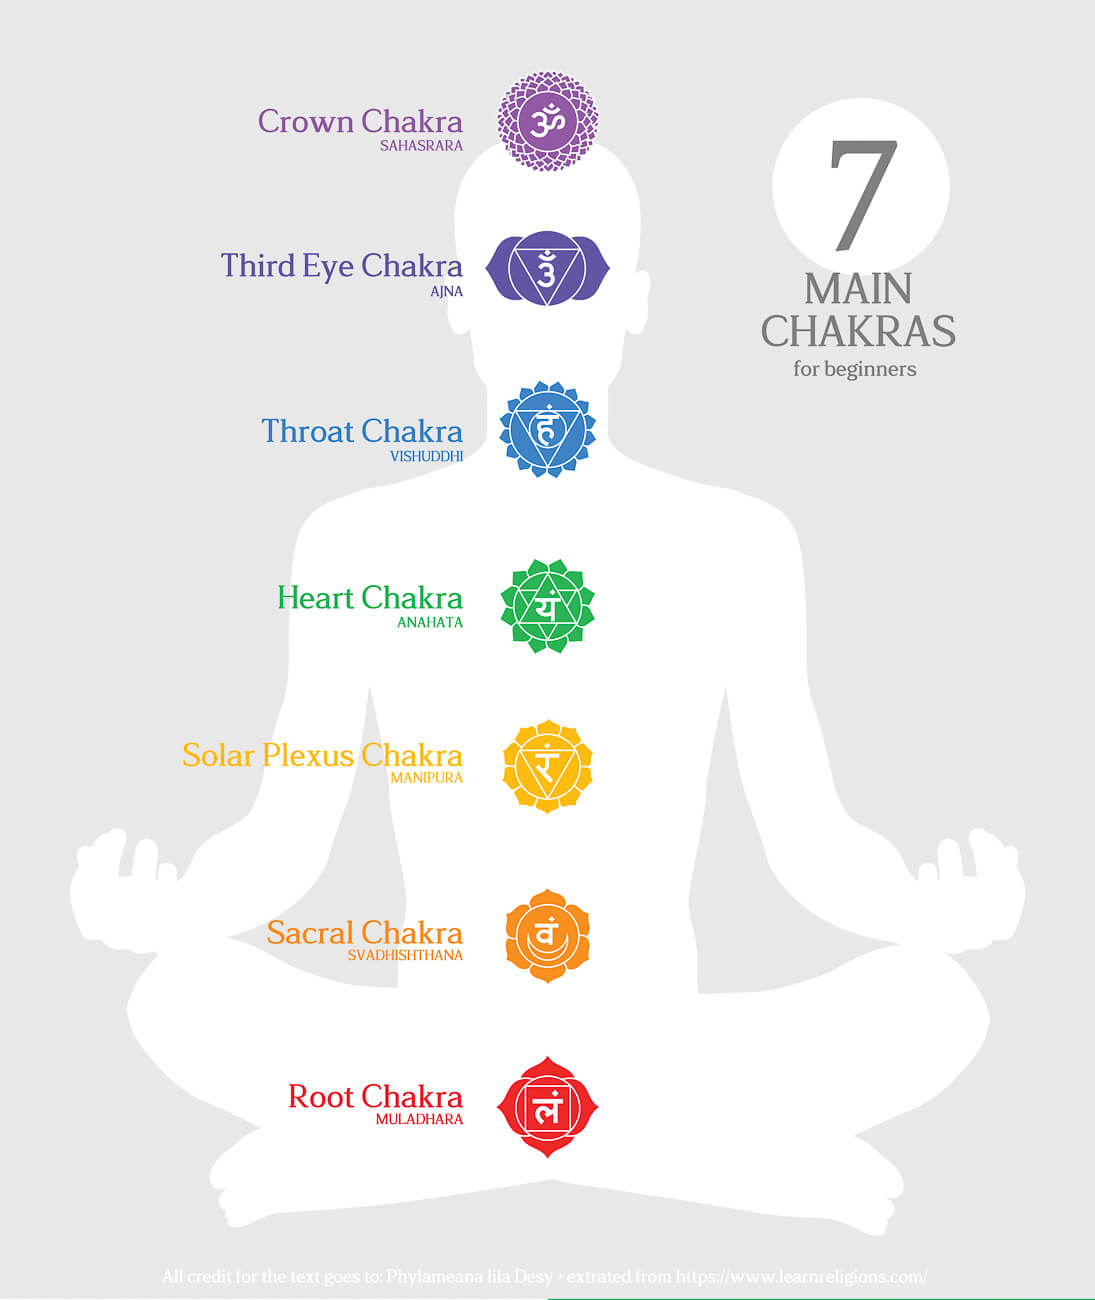 Detail Chakras Picture Nomer 2